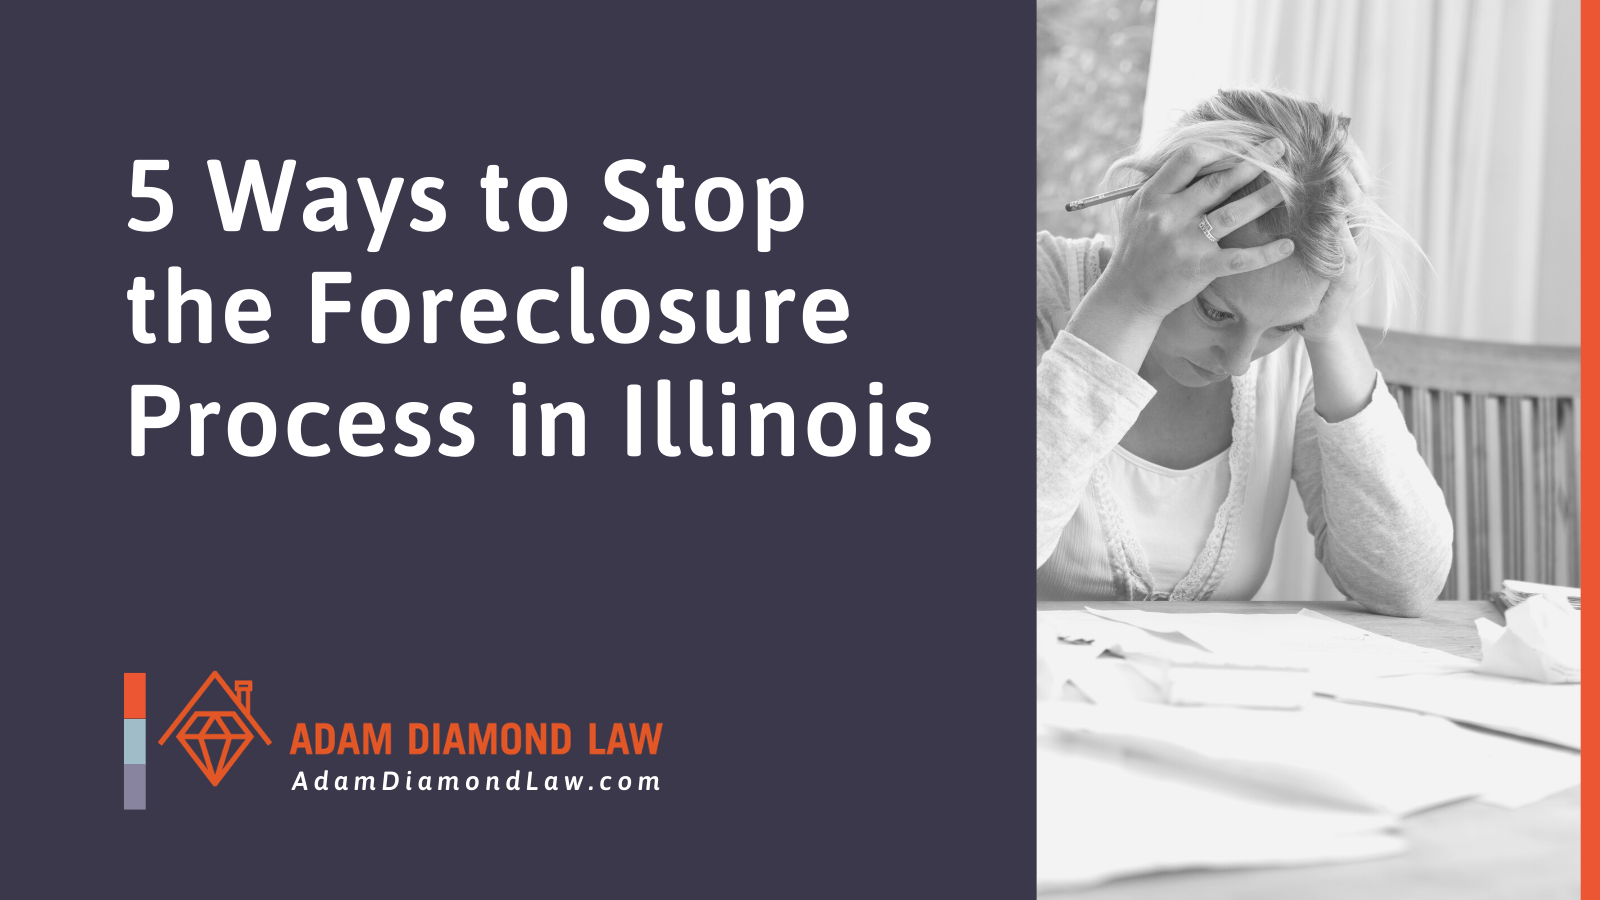 5 Ways to Stop the Foreclosure Process in Illinois - Adam Diamond Law | McHenry, IL Residential Real Estate Lawyer